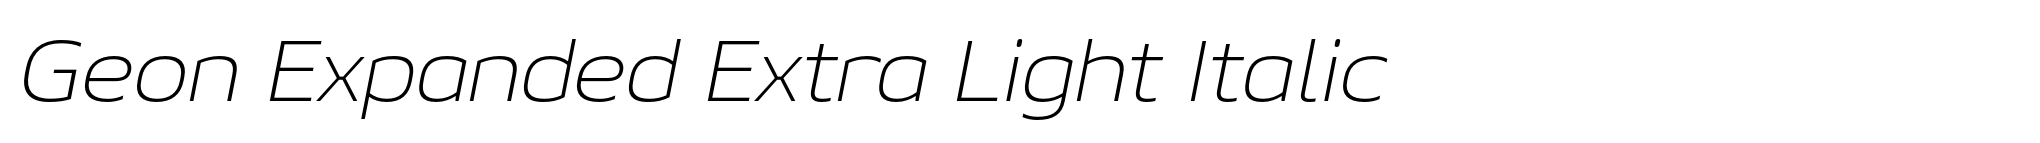 Geon Expanded Extra Light Italic image